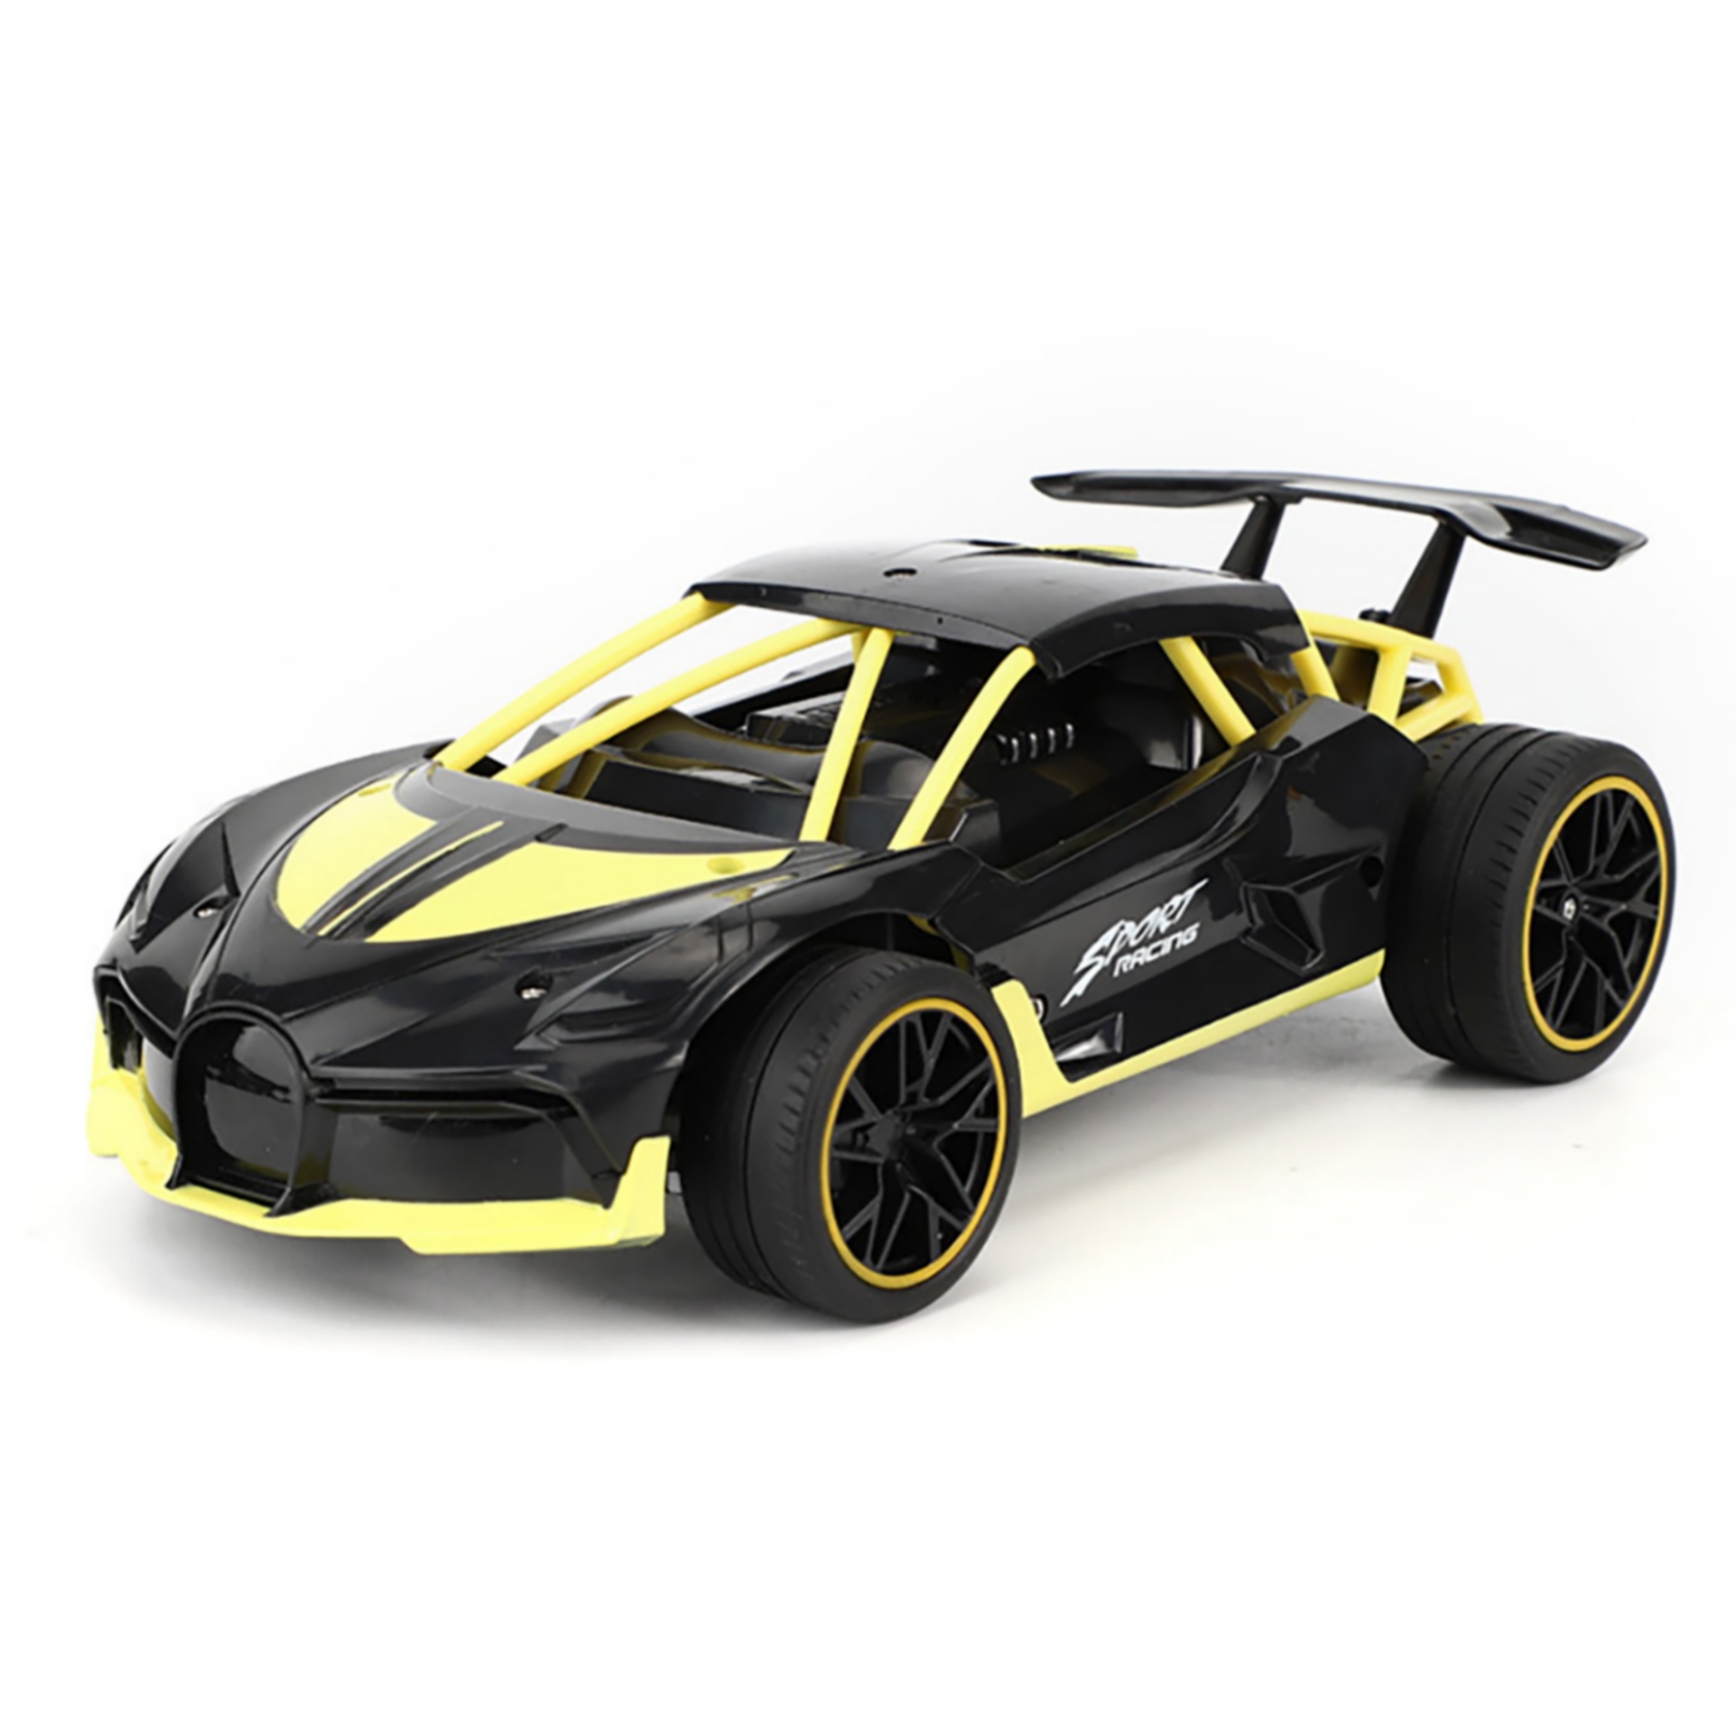 2.4G RC Car Toy 15km/h High Speed Off-Road Vehicle Remote Control Racing Car Toy For Boys Girls Birthday Christmas Gifts